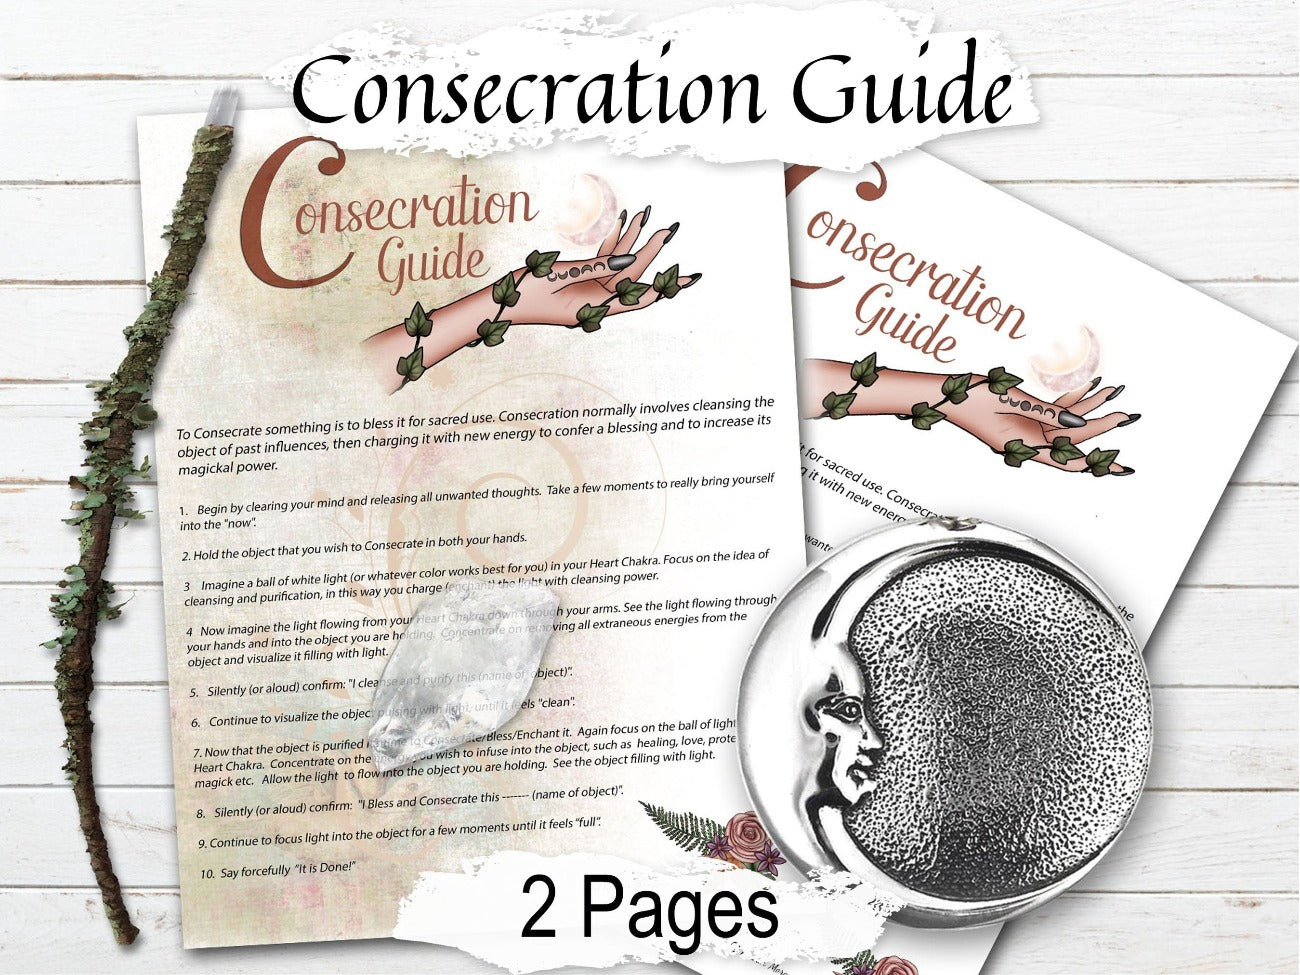 CONSECRATION GUIDE, How To Consecrate Empower Enchant, Wicca Witchcraft Blessing Ritual of Sacred Tools, Witchcraft Grimoire Blessing Spell - Morgana Magick Spell